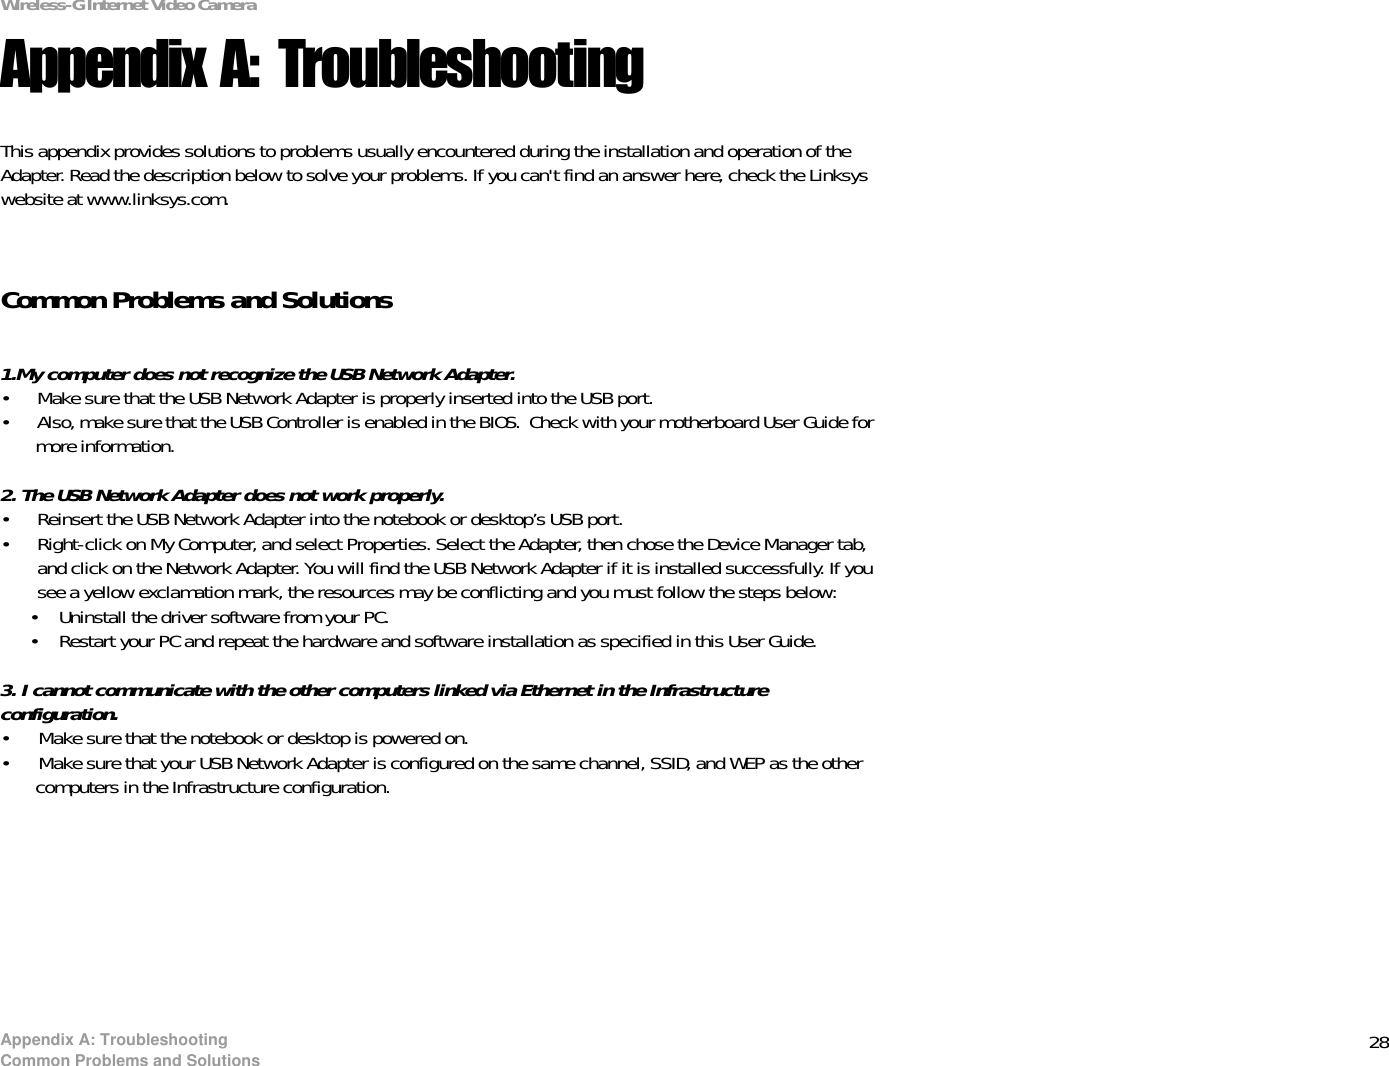 28Appendix A: TroubleshootingCommon Problems and SolutionsWireless-G Internet Video CameraAppendix A: TroubleshootingThis appendix provides solutions to problems usually encountered during the installation and operation of the Adapter. Read the description below to solve your problems. If you can&apos;t find an answer here, check the Linksys website at www.linksys.com.Common Problems and Solutions1.My computer does not recognize the USB Network Adapter.• Make sure that the USB Network Adapter is properly inserted into the USB port.• Also, make sure that the USB Controller is enabled in the BIOS.  Check with your motherboard User Guide for more information.2. The USB Network Adapter does not work properly.• Reinsert the USB Network Adapter into the notebook or desktop’s USB port. • Right-click on My Computer, and select Properties. Select the Adapter, then chose the Device Manager tab, and click on the Network Adapter. You will find the USB Network Adapter if it is installed successfully. If you see a yellow exclamation mark, the resources may be conflicting and you must follow the steps below:• Uninstall the driver software from your PC.• Restart your PC and repeat the hardware and software installation as specified in this User Guide.3. I cannot communicate with the other computers linked via Ethernet in the Infrastructure configuration.• Make sure that the notebook or desktop is powered on.• Make sure that your USB Network Adapter is configured on the same channel, SSID, and WEP as the other computers in the Infrastructure configuration.